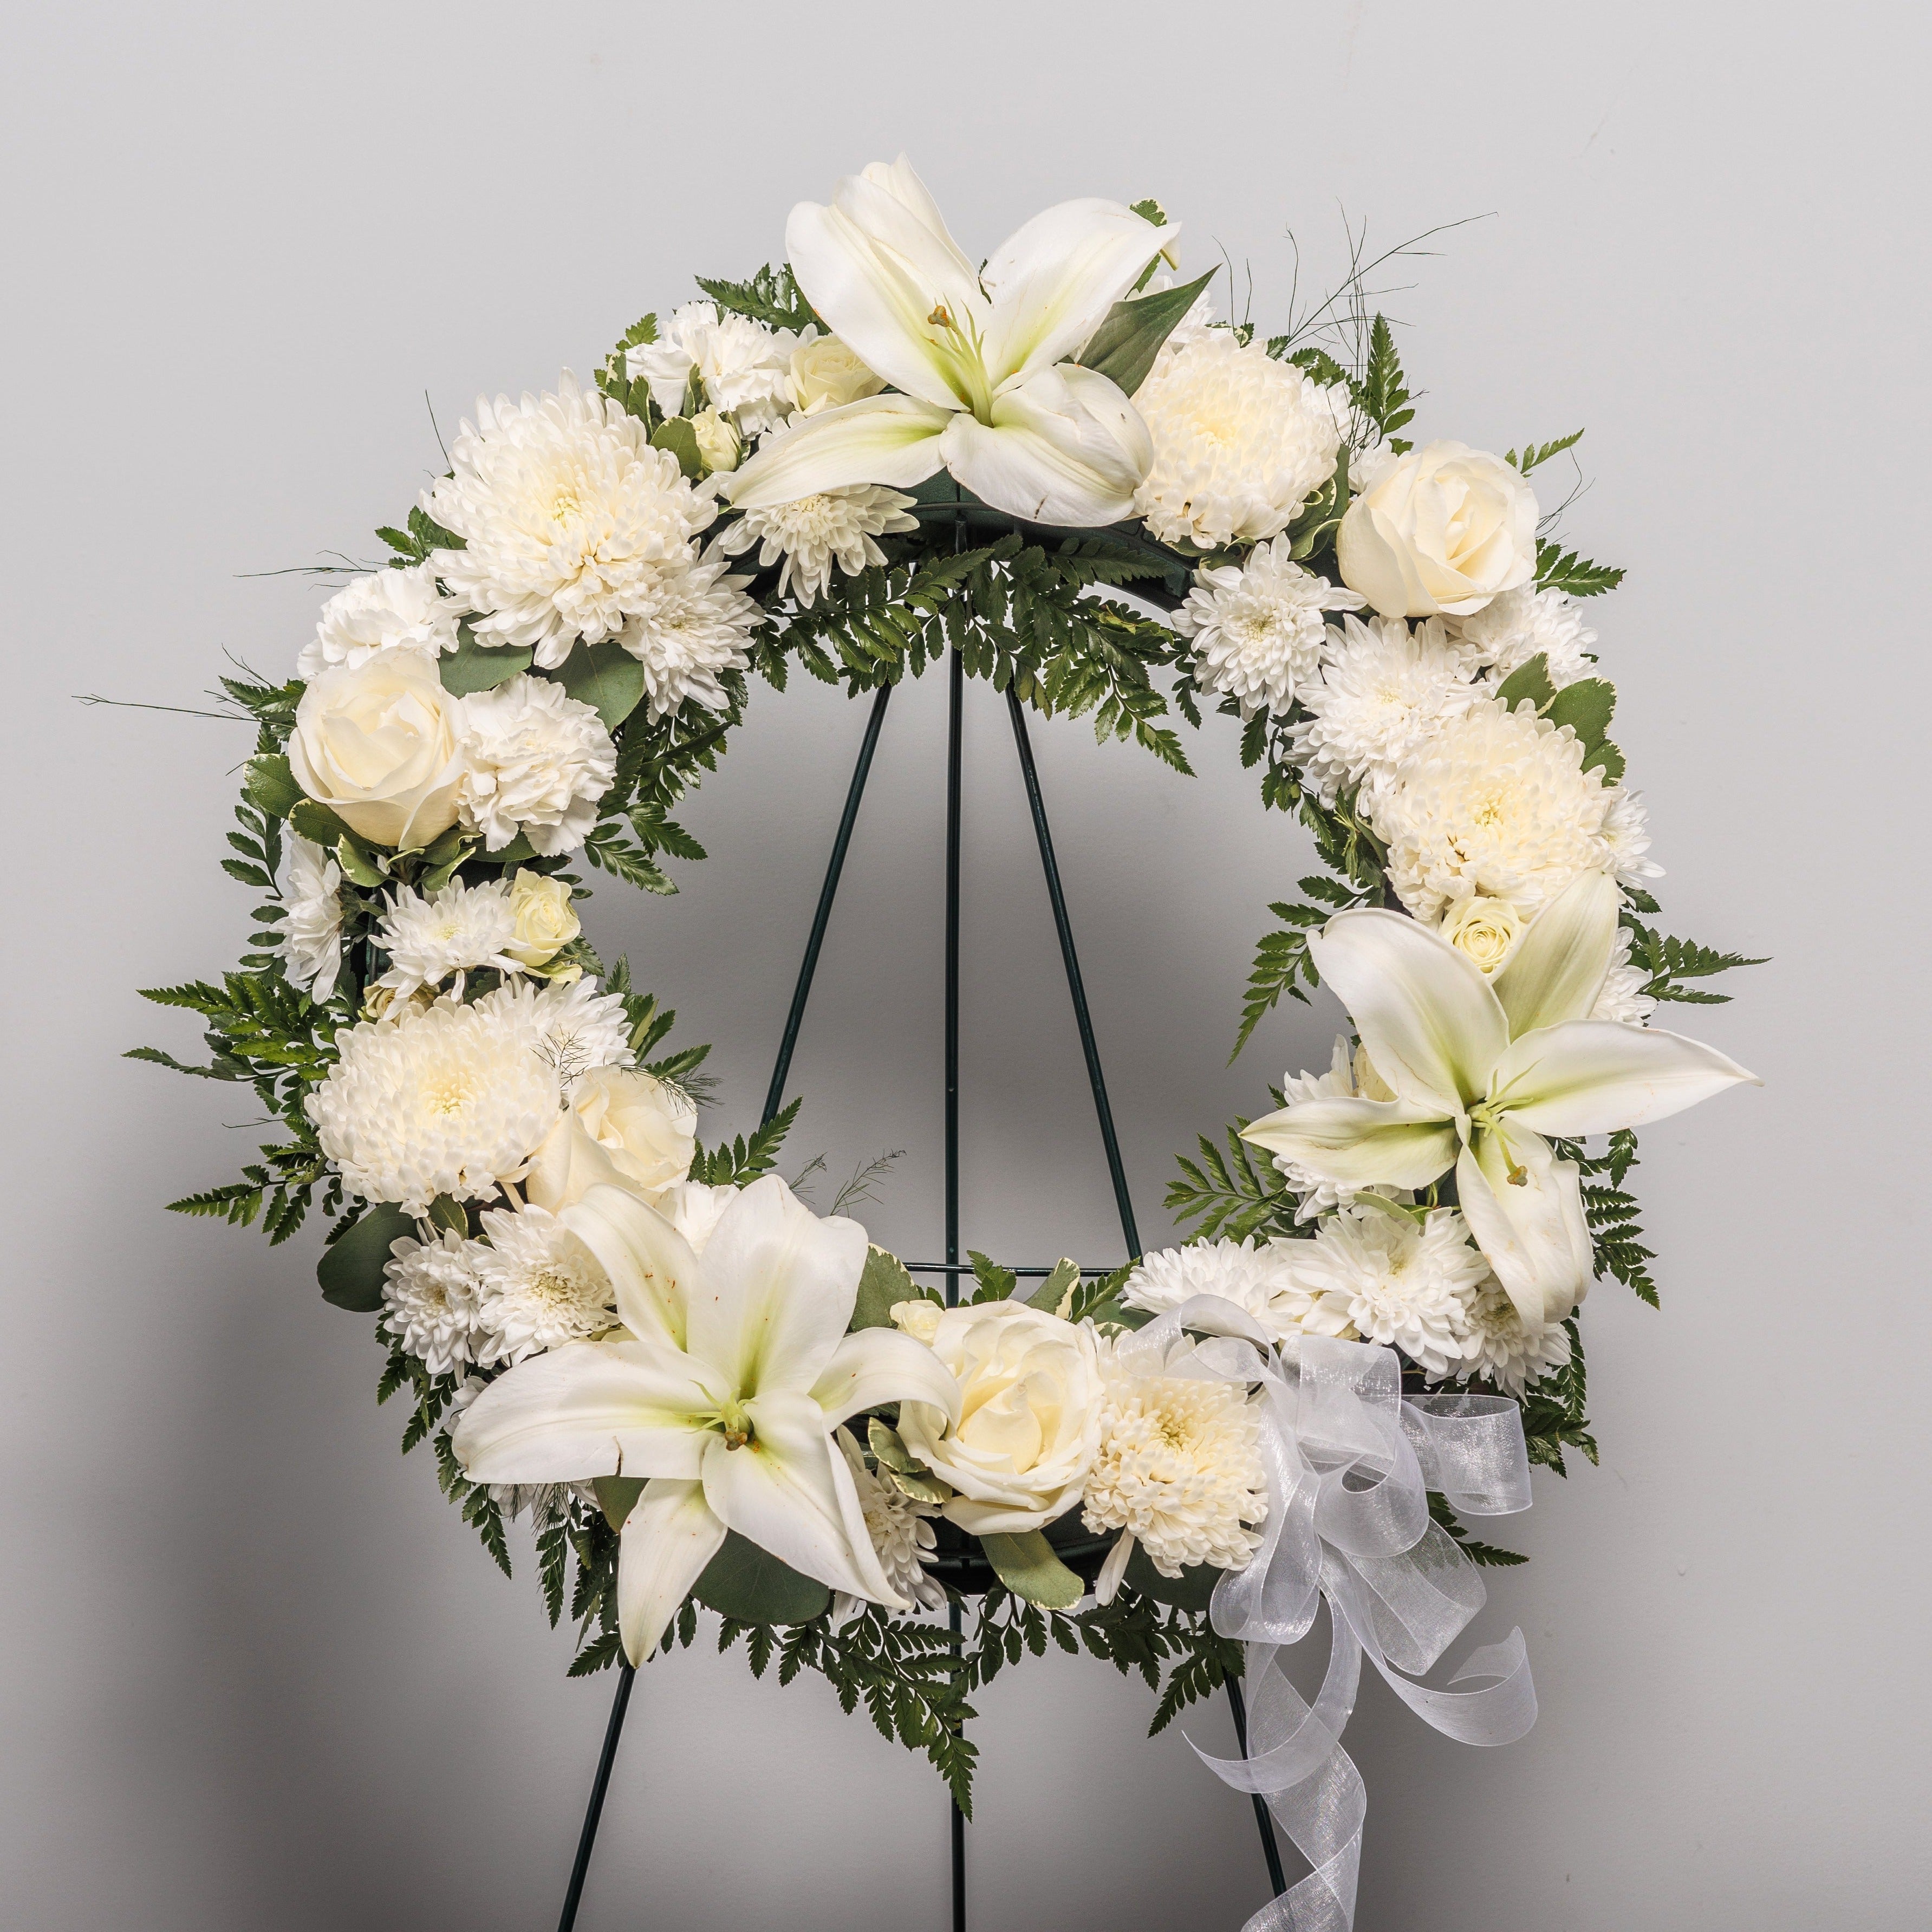 A white wreath on an easel with carnations, roses, mums and lilies.